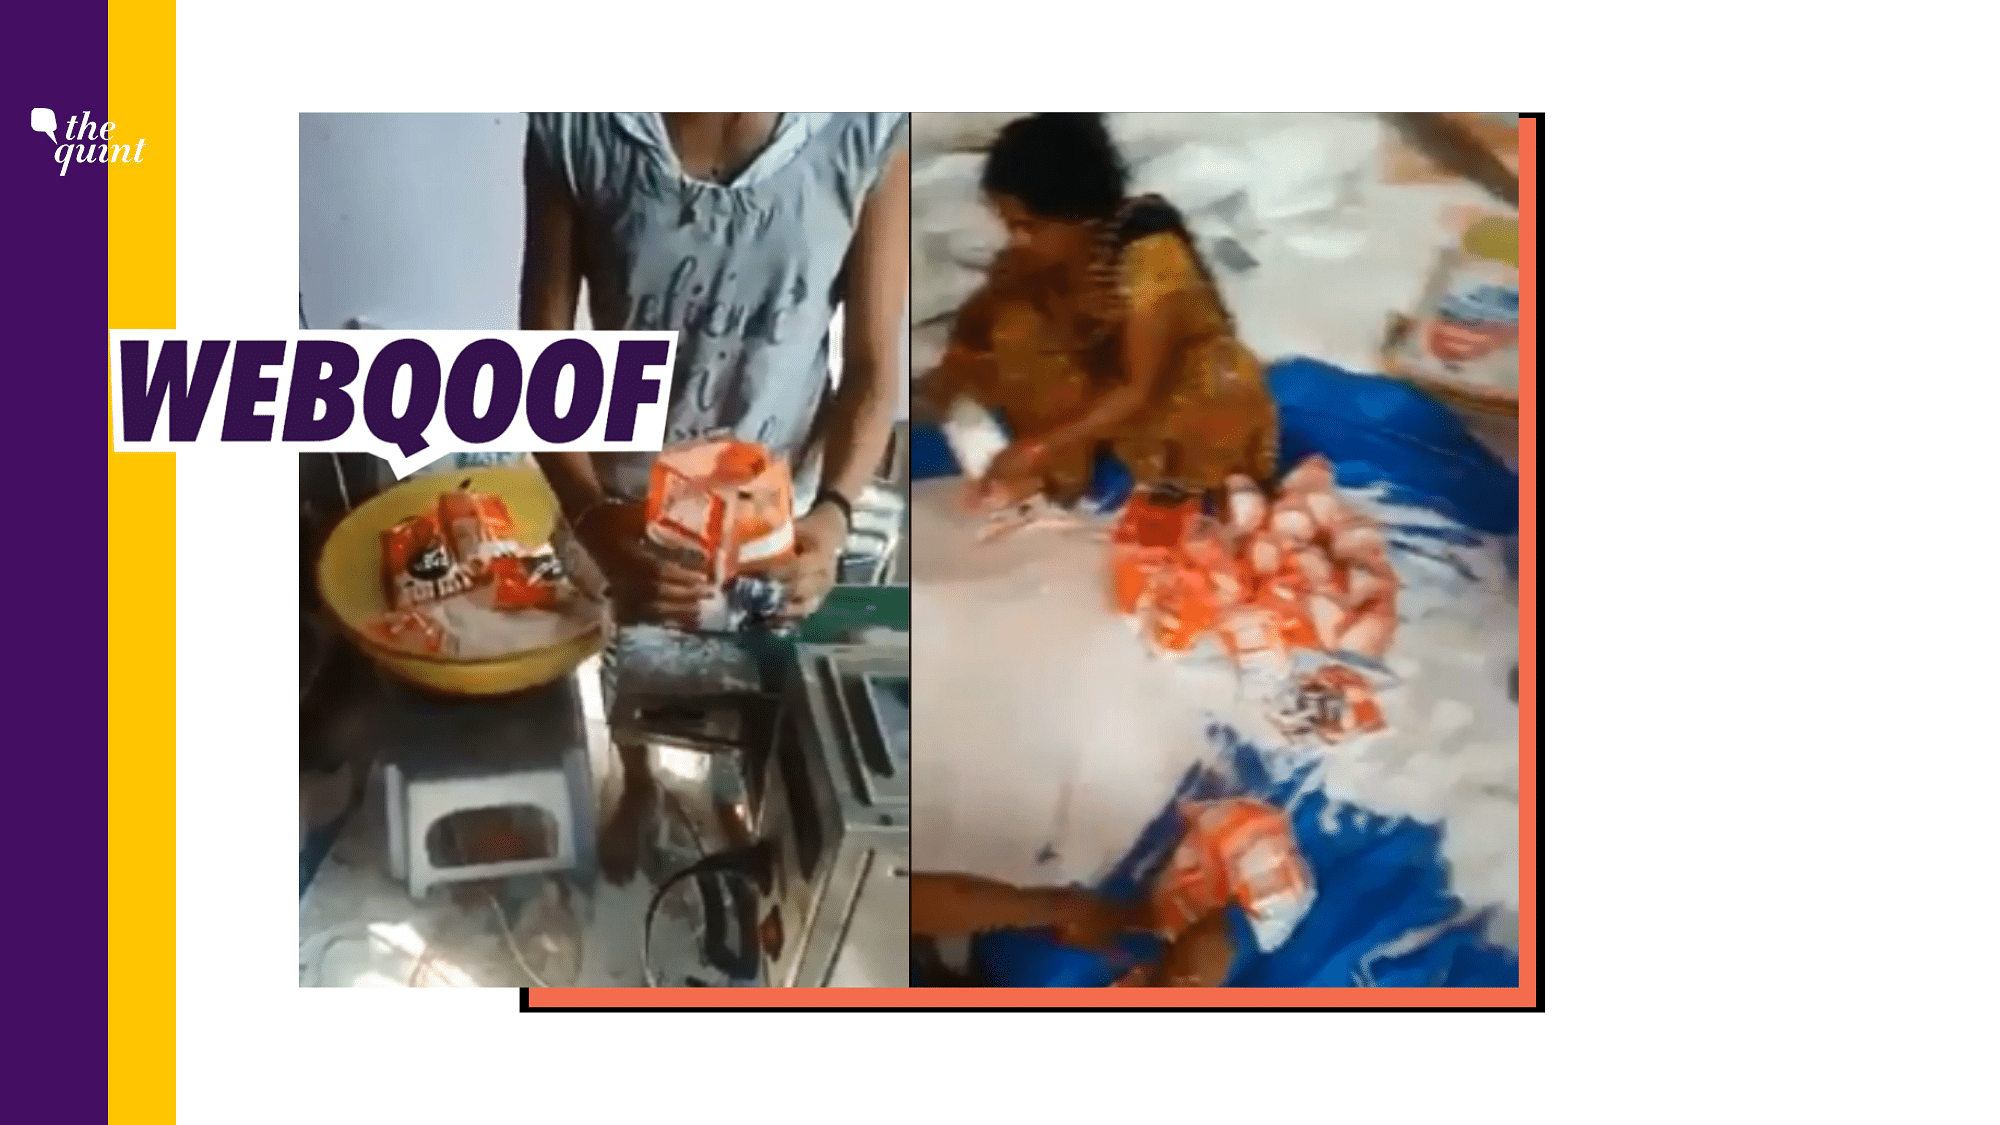 A viral video falsely claimed that it shows the packaging of Tata Salt in an unhygienic manner.